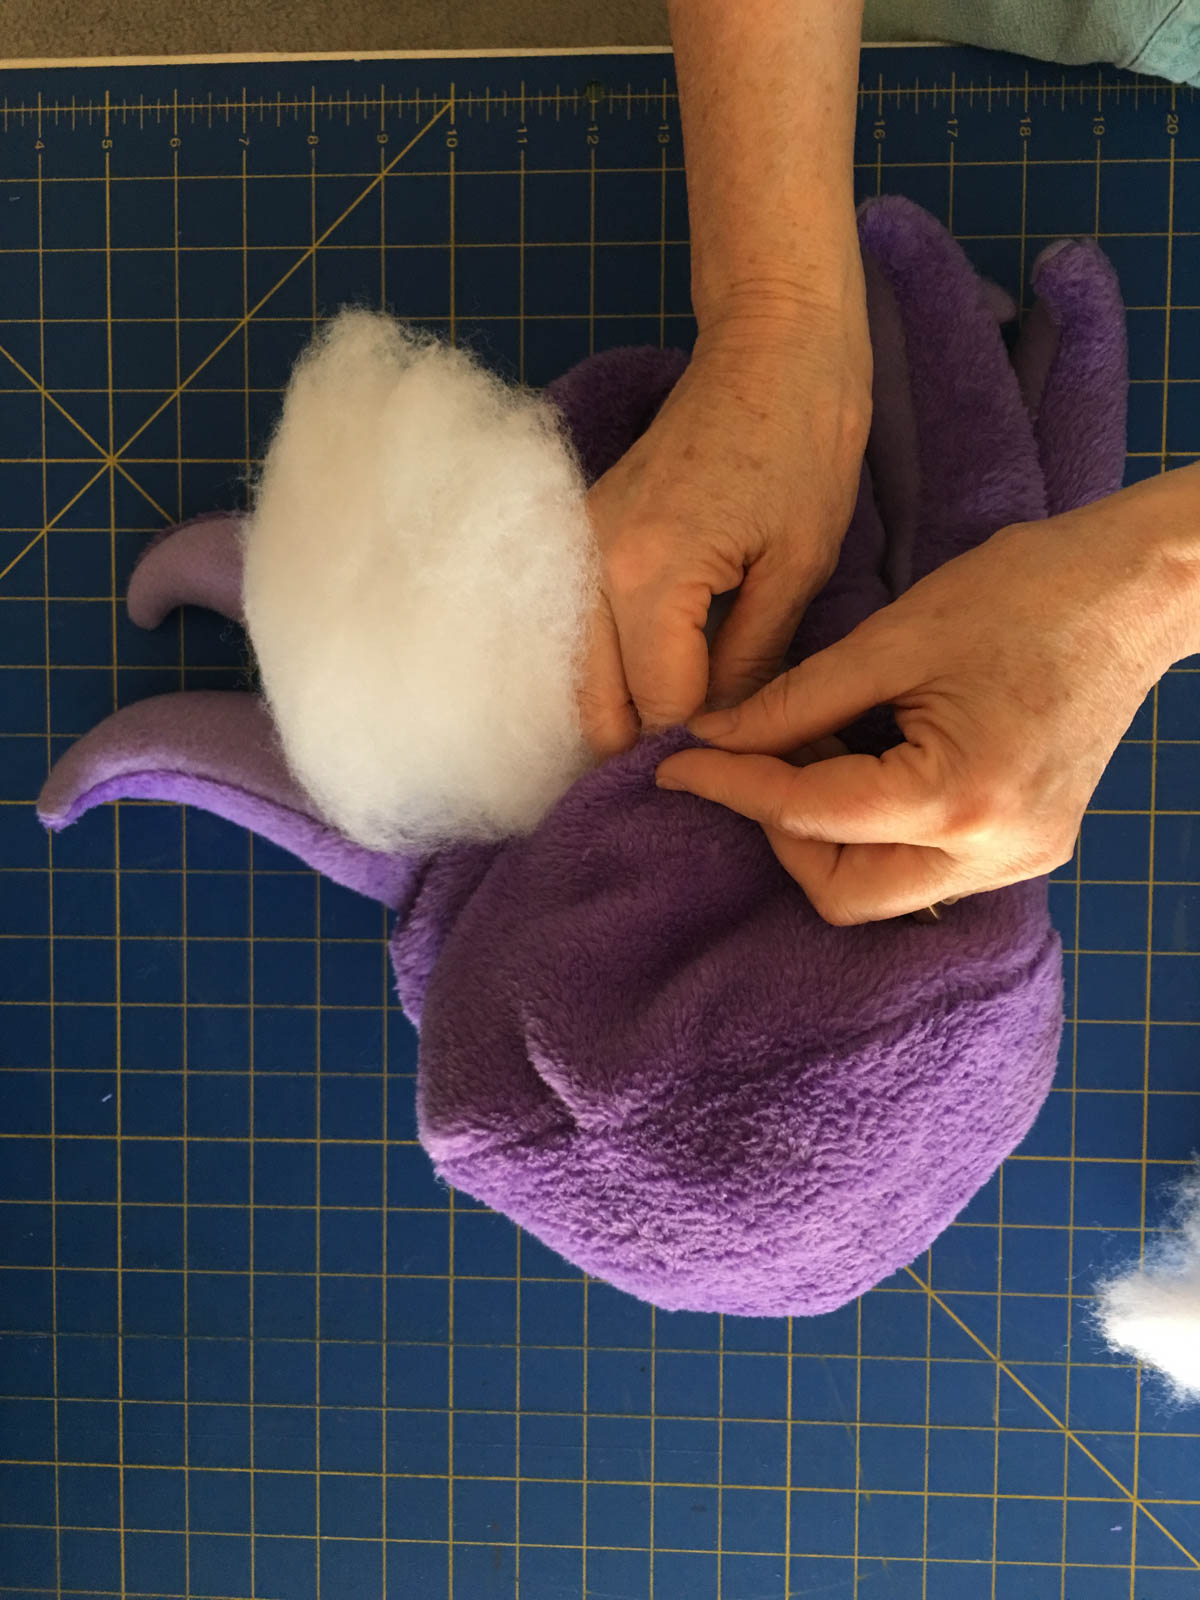 How to sew Stubby the Squid - How to sew Stubby the Squid - How to sew Stubby the Squid - 18. Stuff with polyester stuffing